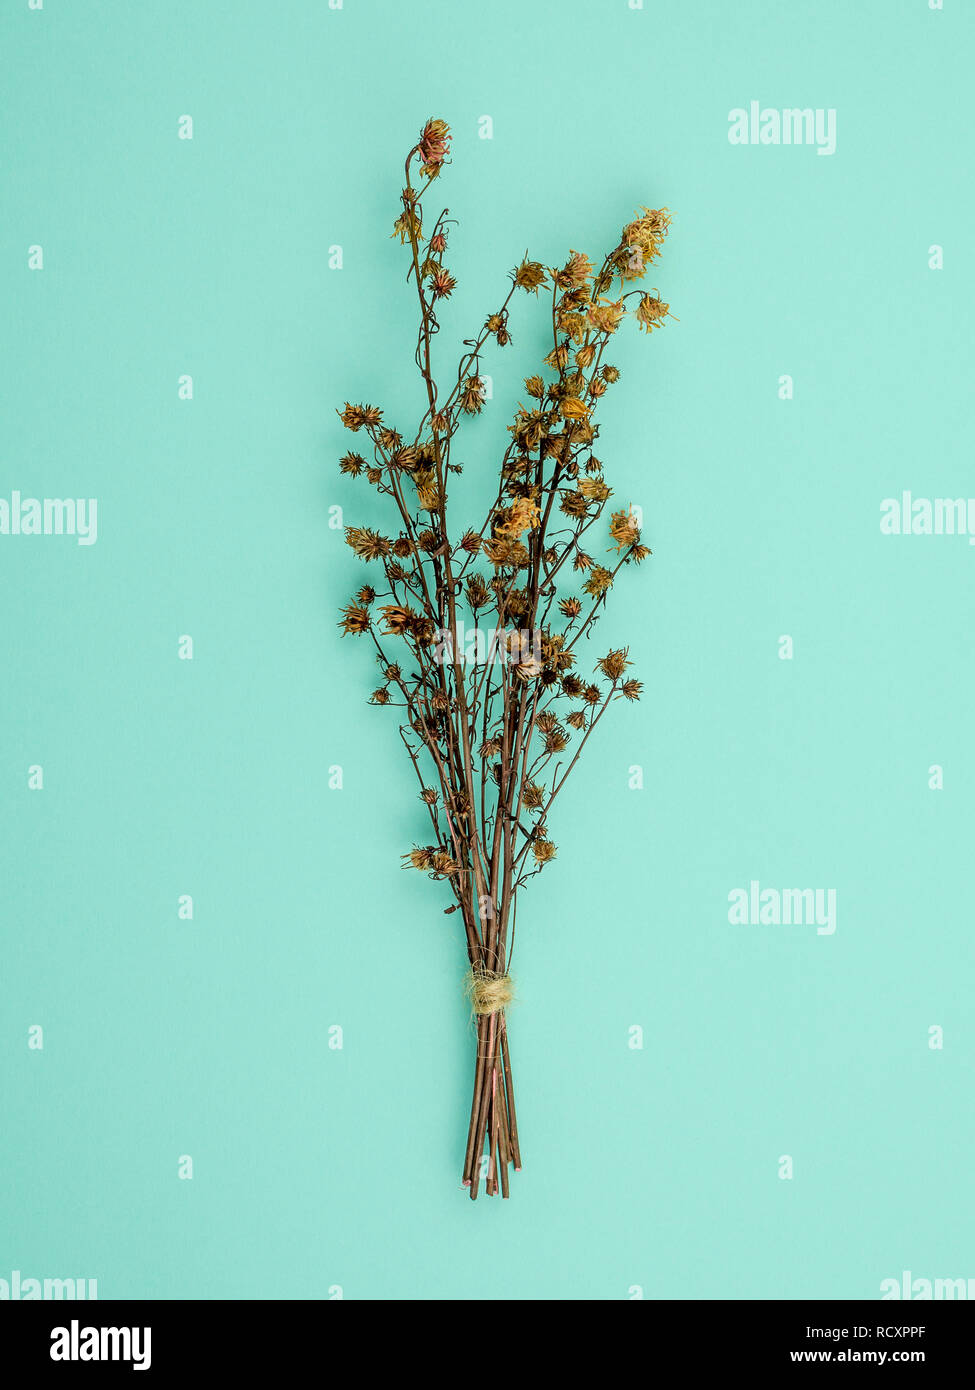 Top view bouquet of dried and wilted brown Gypsophila flowers on blue background Stock Photo